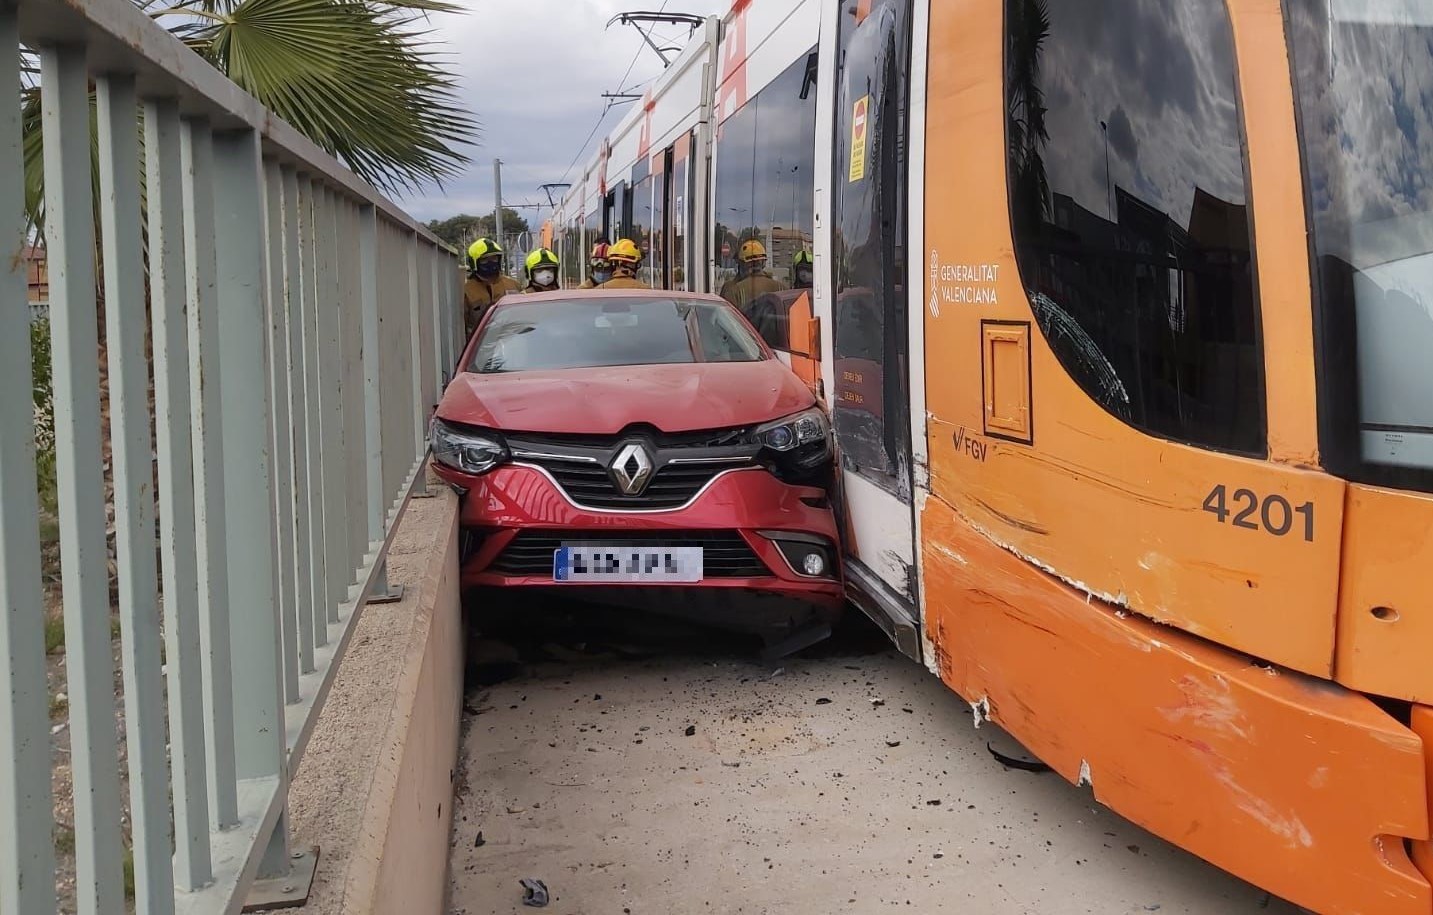 Both Tight Squeeze For Car And Alicante Tram